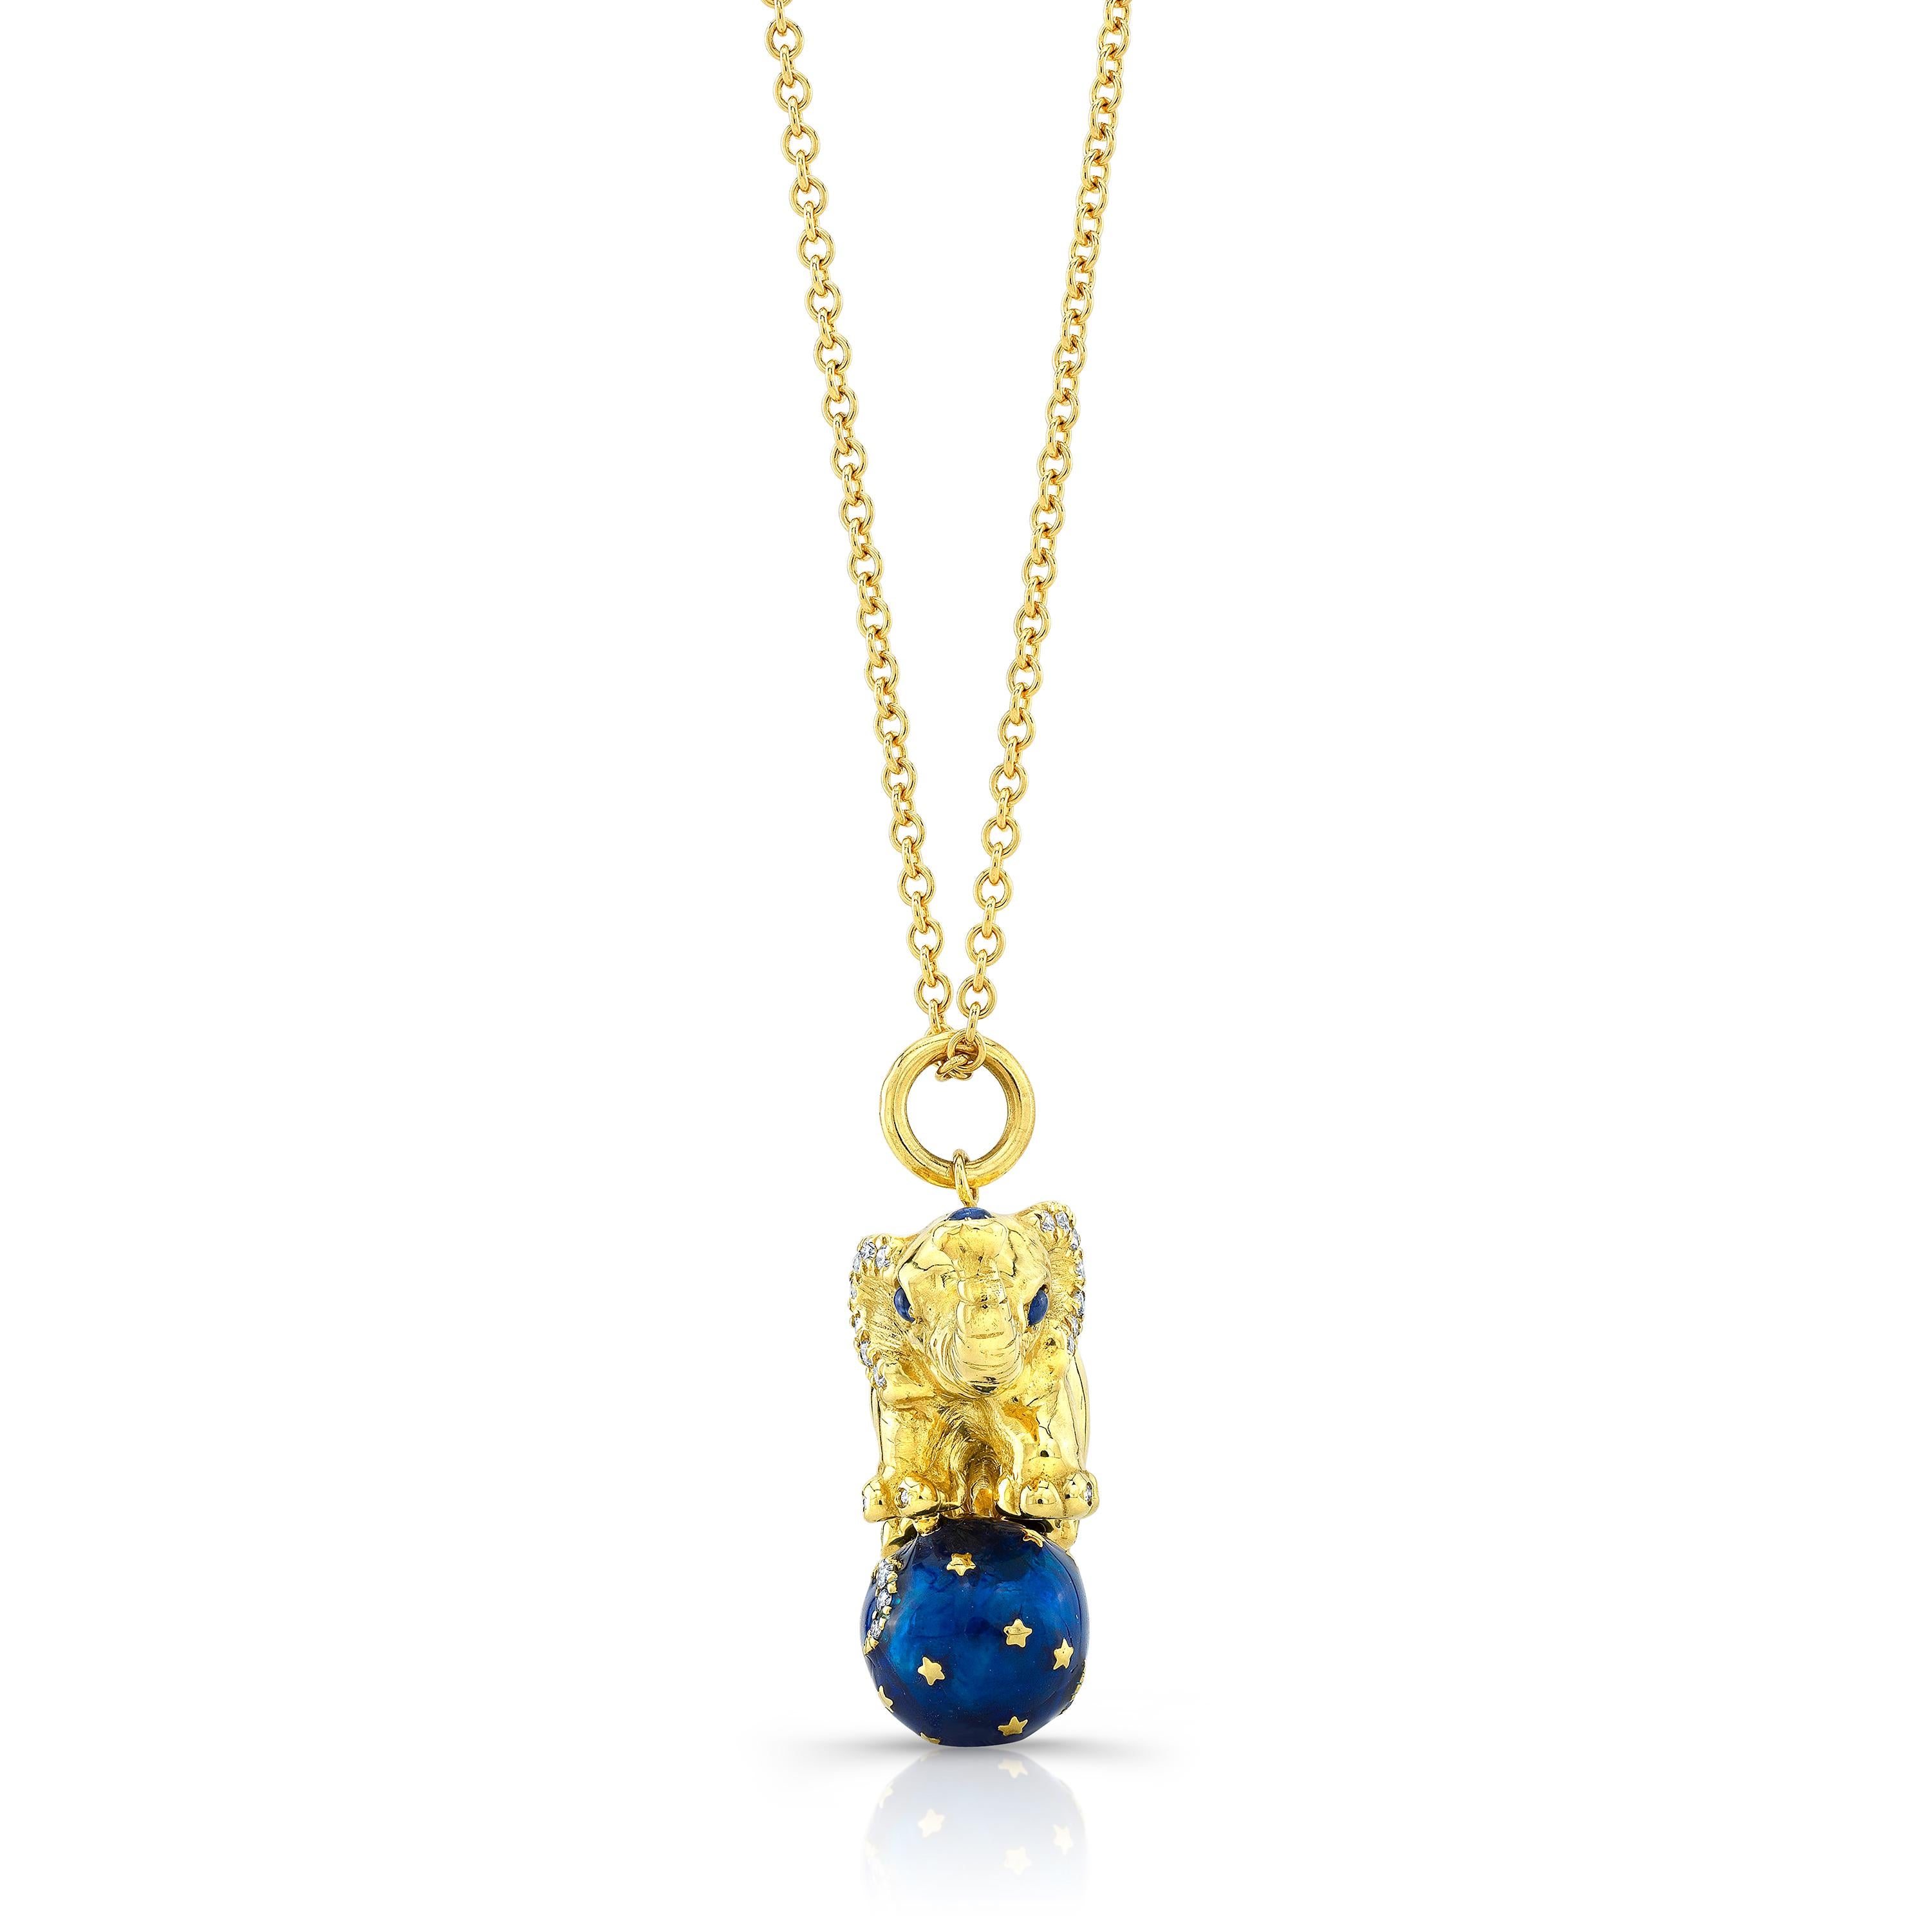 Amy Y’s Contemporary 18K-yellow gold, diamond, sapphire and enamel elephant pendant necklace Tuffi is a one-of-a-kind gem. Full of character is this charming elephant is balanced on a dazzling hand-painted midnight blue enamel ball with a diamond